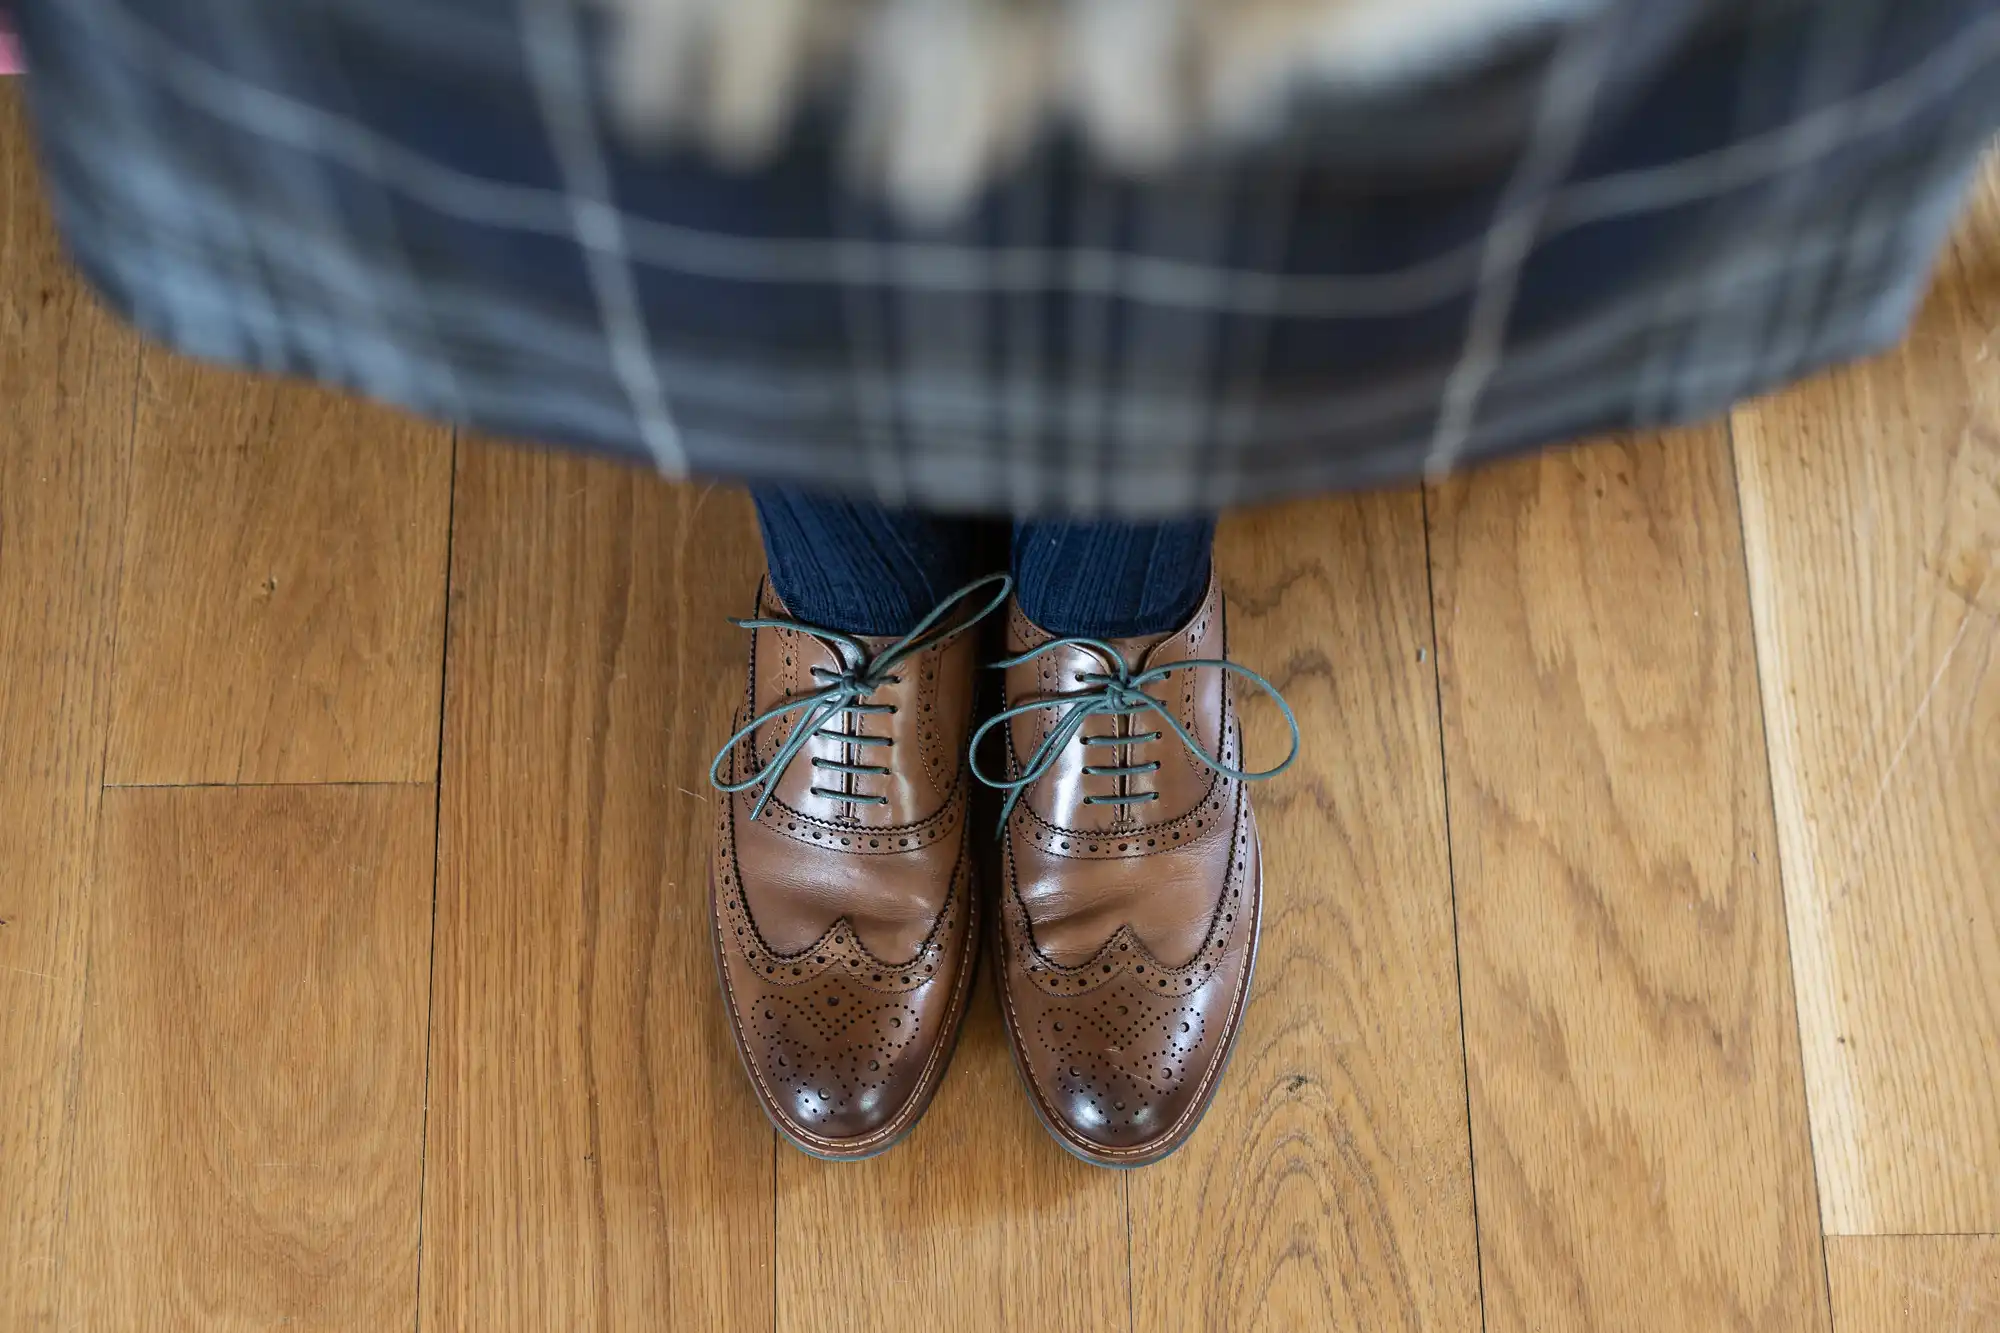 A person standing on a wooden floor wearing brown brogue shoes and blue jeans, with the edge of a plaid shirt visible.